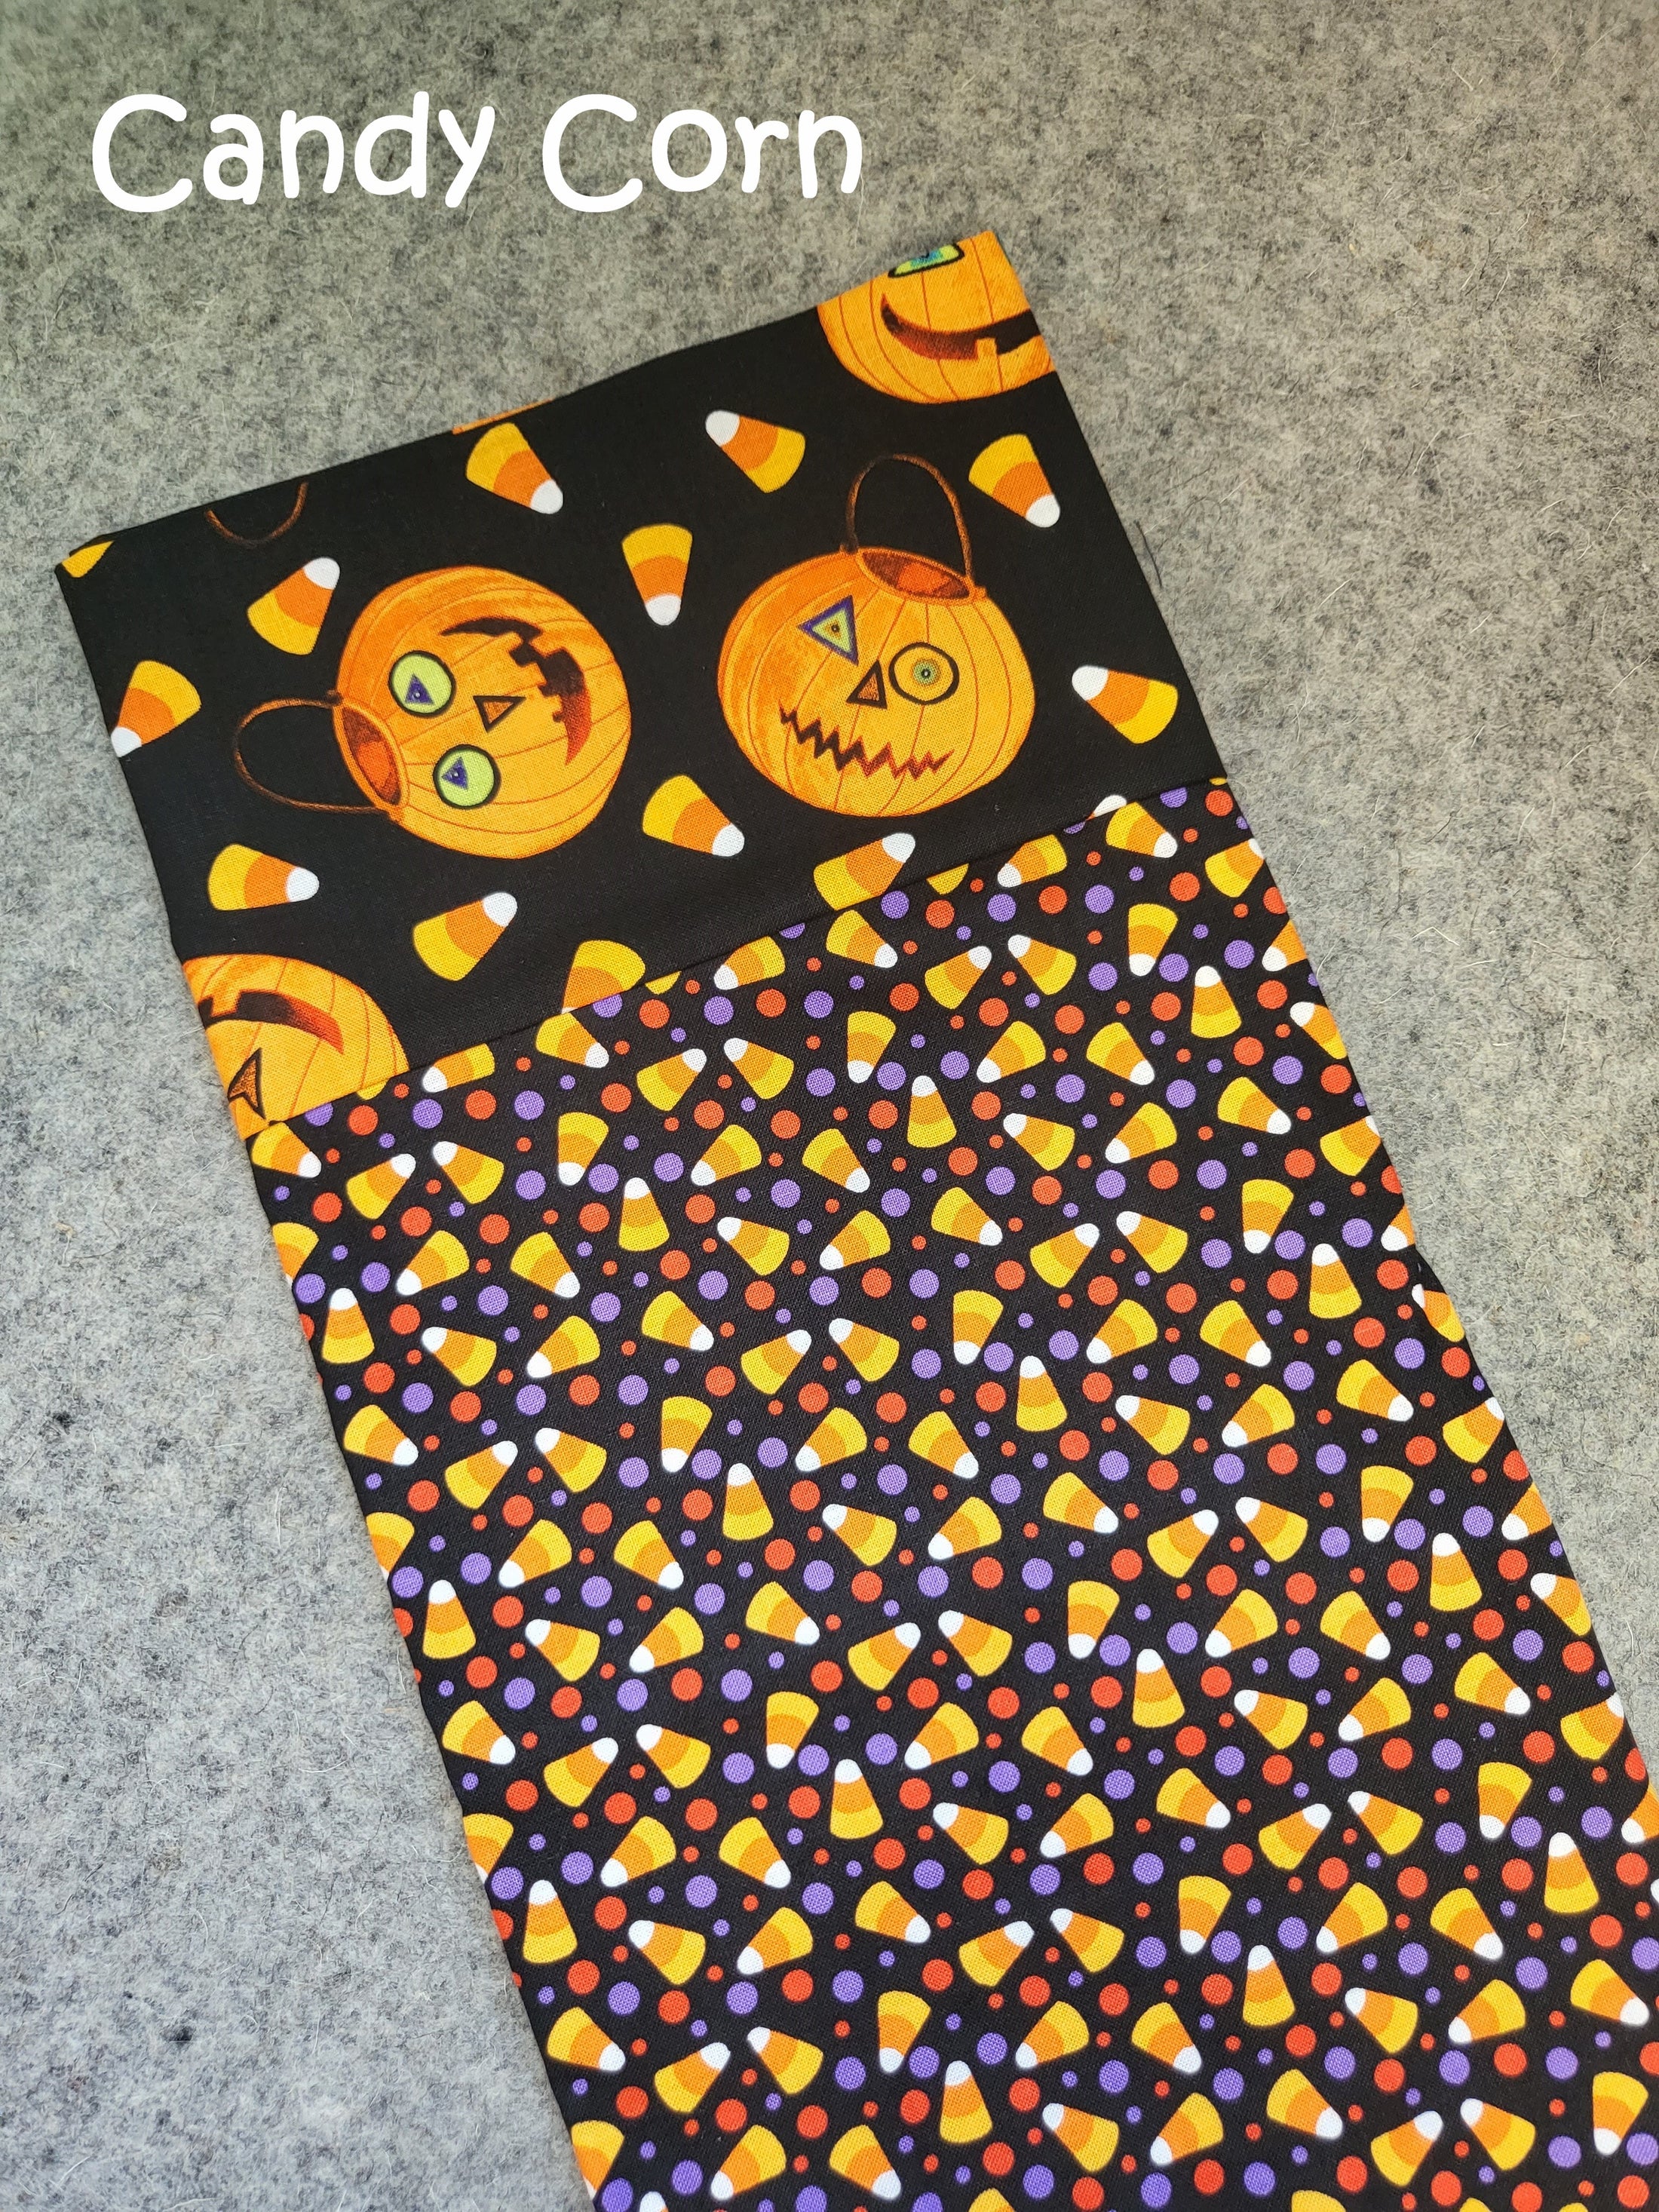 Candy corn halloween pillowcase for trick-or-treating.